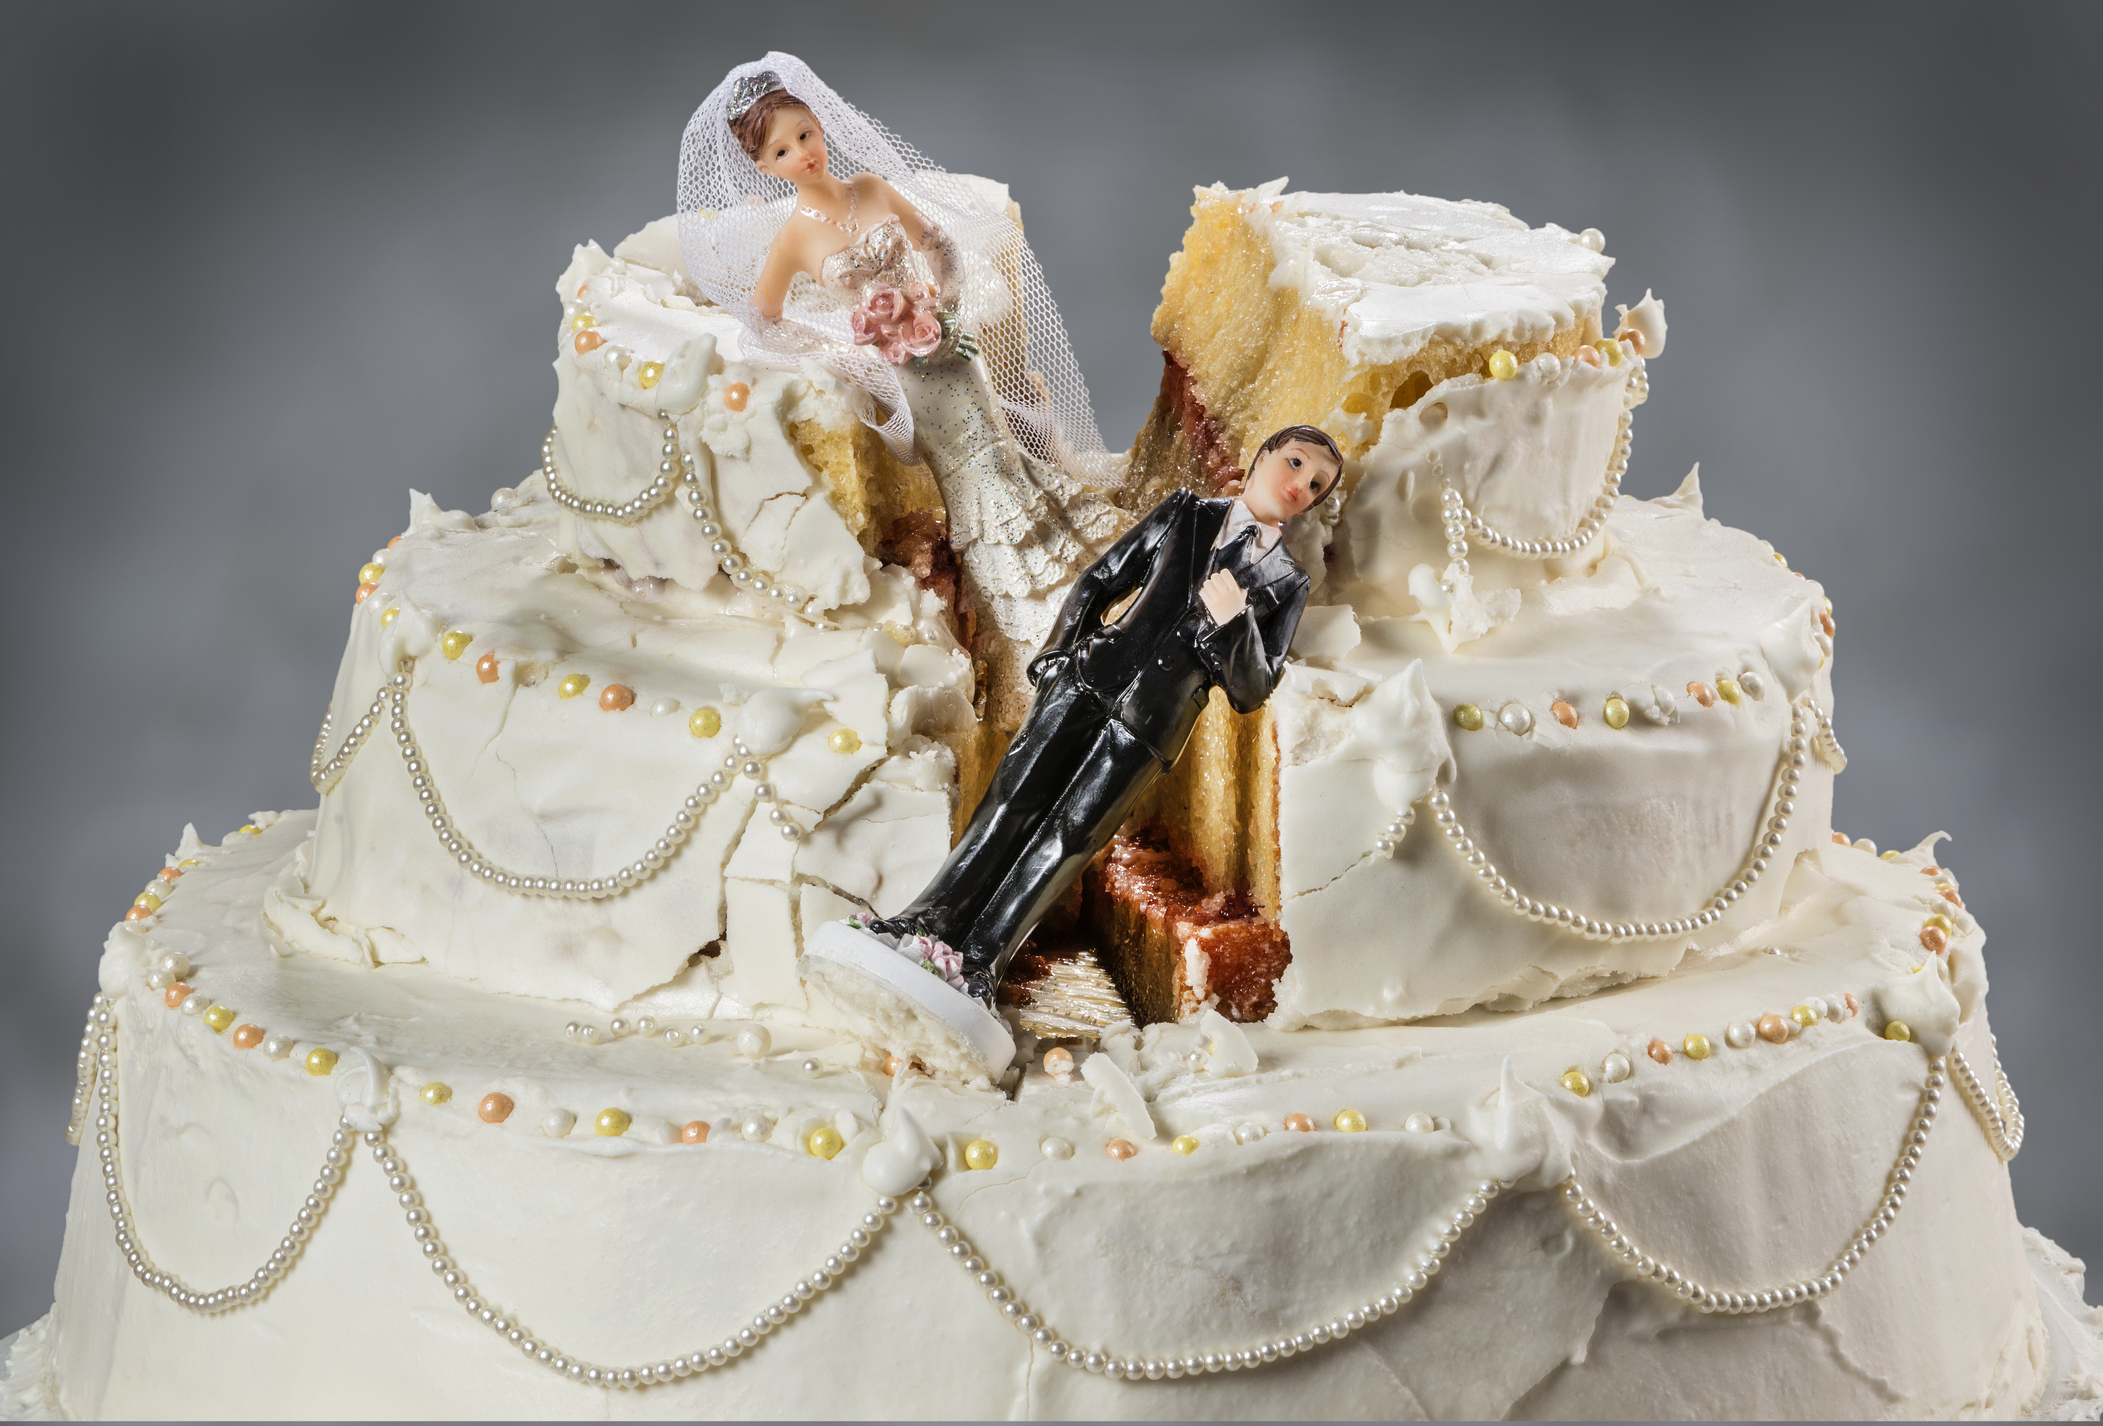 Internet Calls Bride Cheap After Allegedly Charging Wedding Guest 6 80 For Second Slice Of Cake